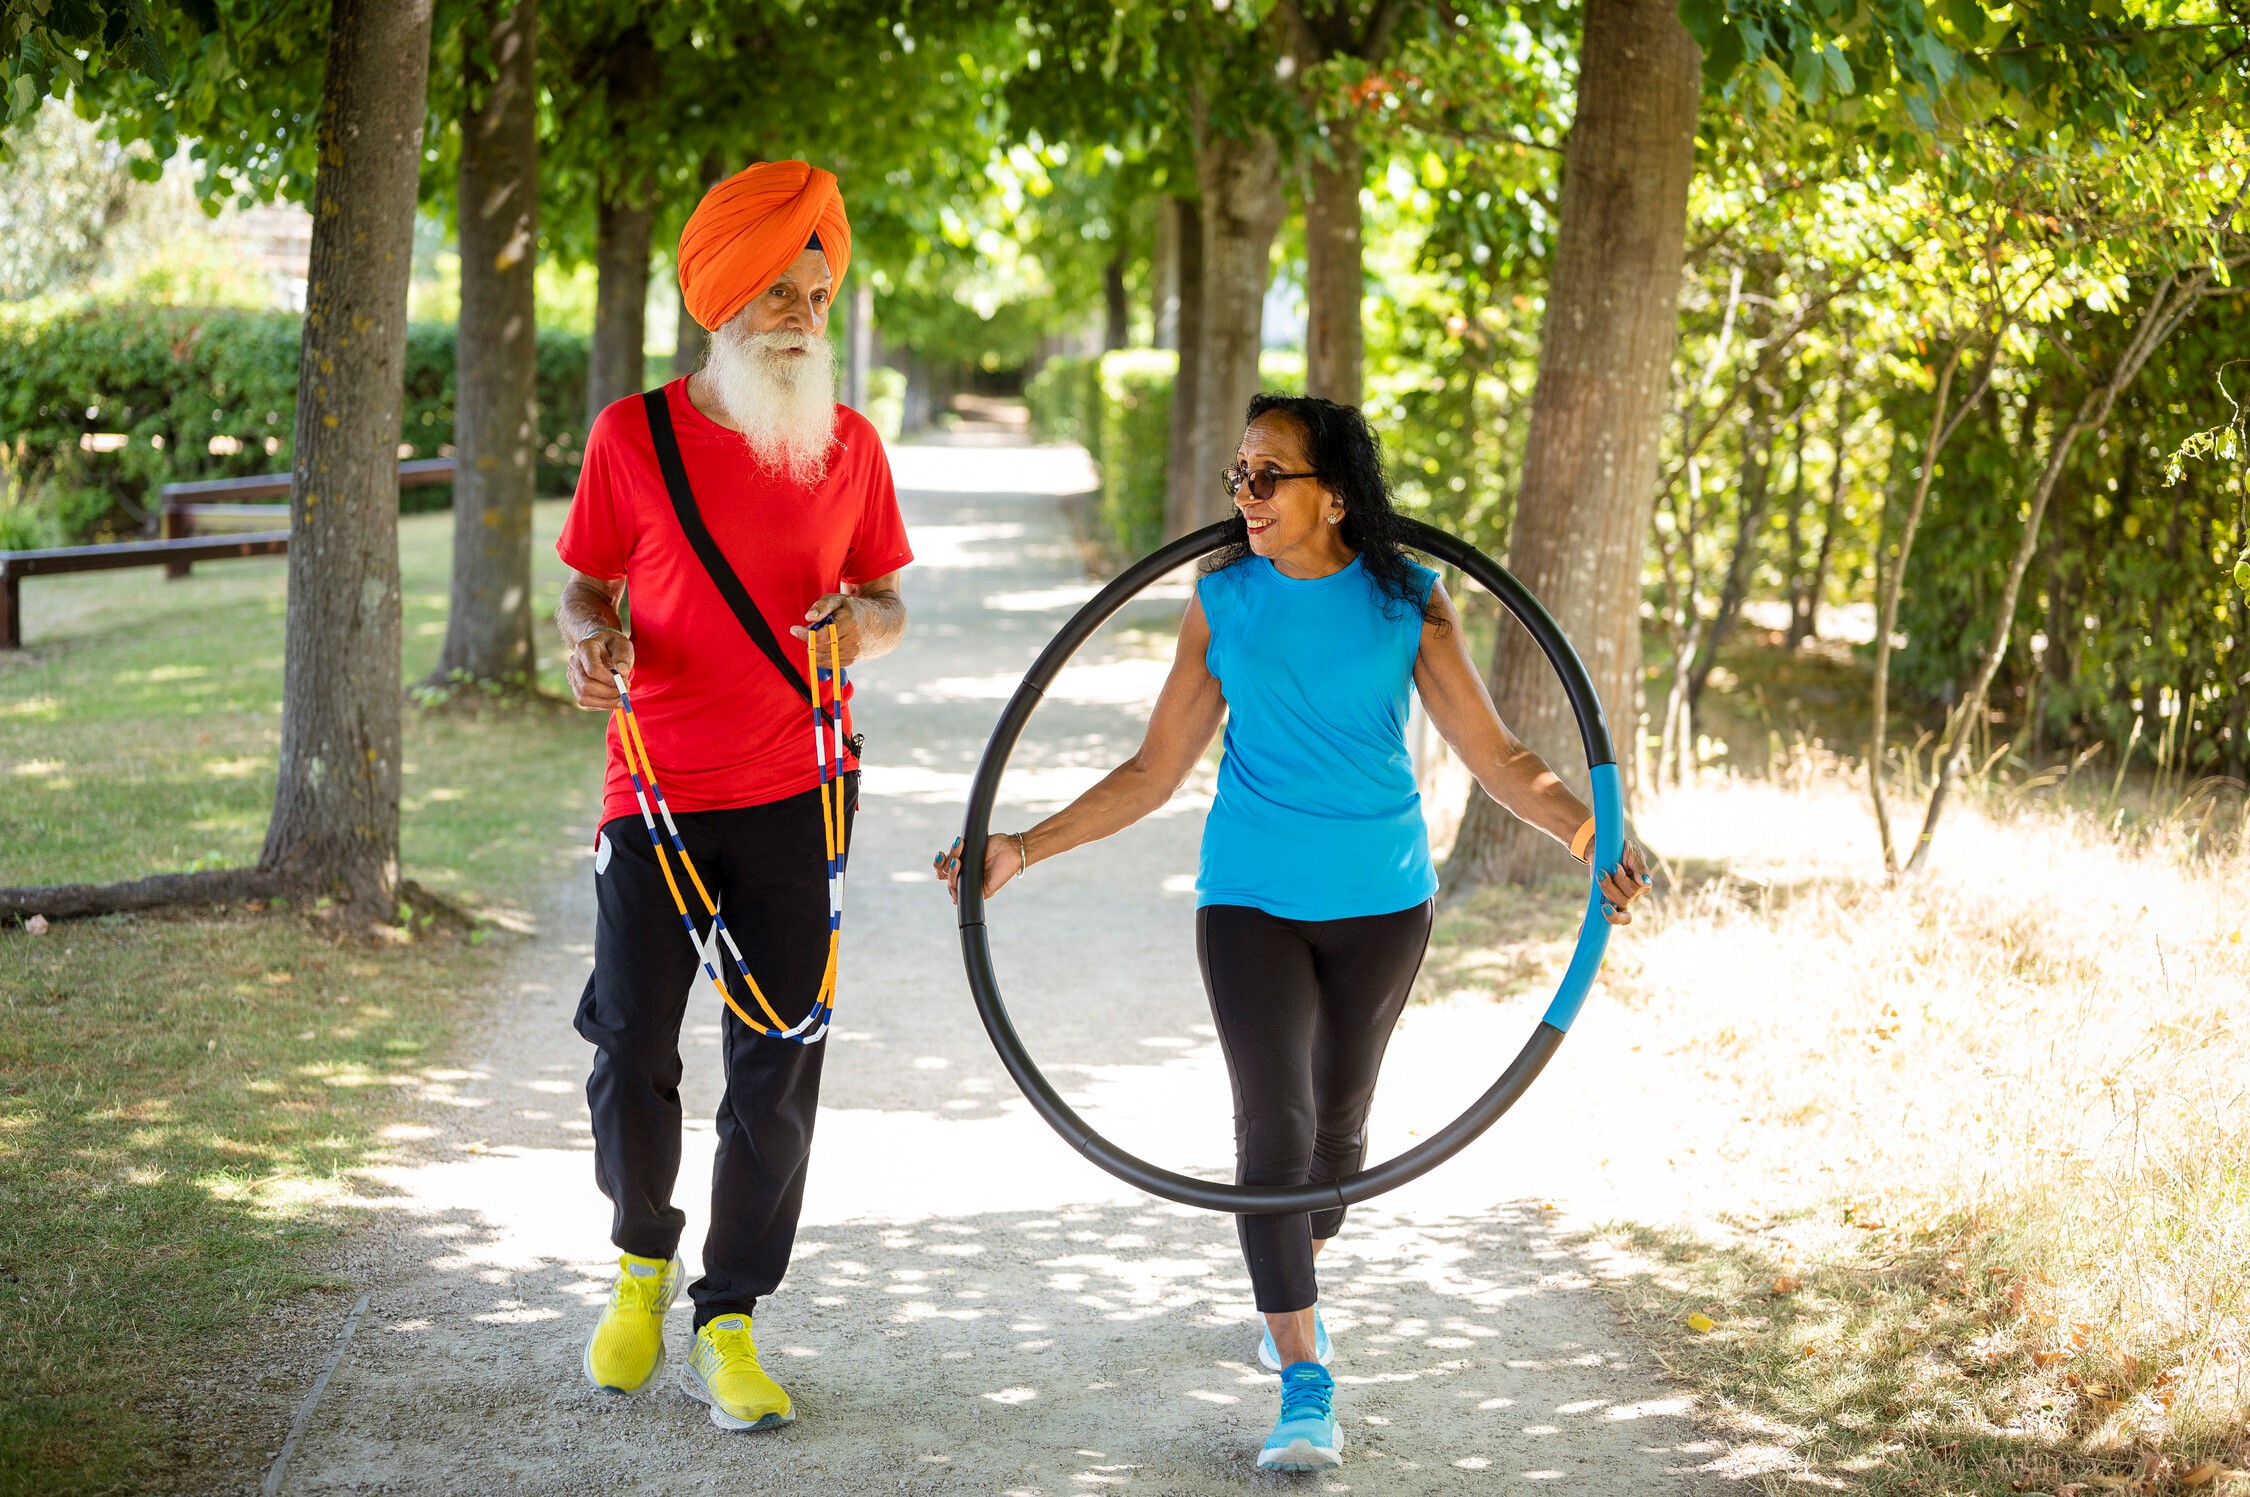 Pritpal and her husband walk along a tree-lined path. Pritpal wears a bright blue t shirt and sunglasses holds a hula hoop and smiles at her husband who wears an orange turban and carried a skipping rope